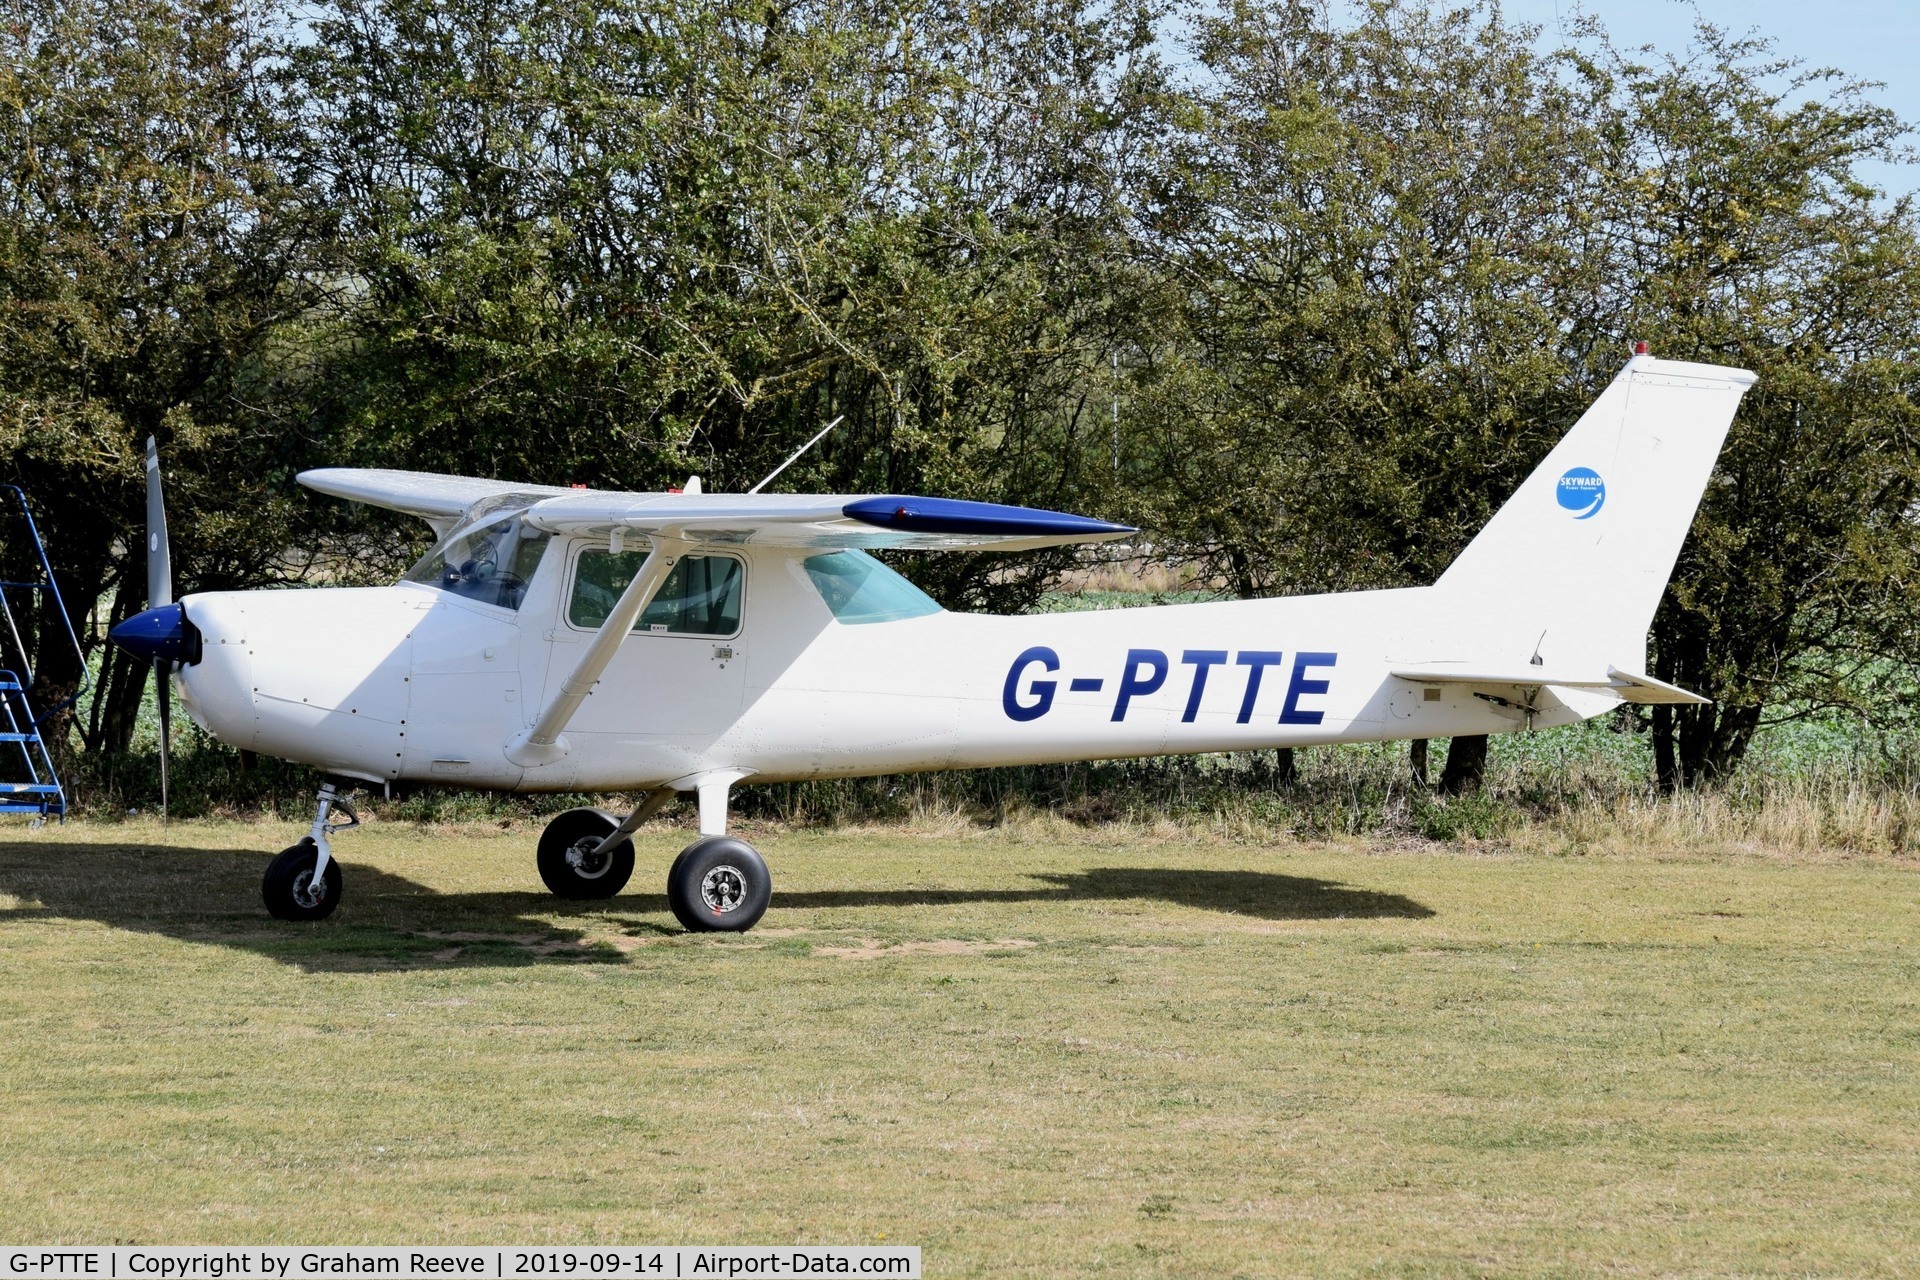 G-PTTE, 1978 Cessna 152 C/N 152-82516, Parked at, Bury St Edmunds, Rougham Airfield, UK.